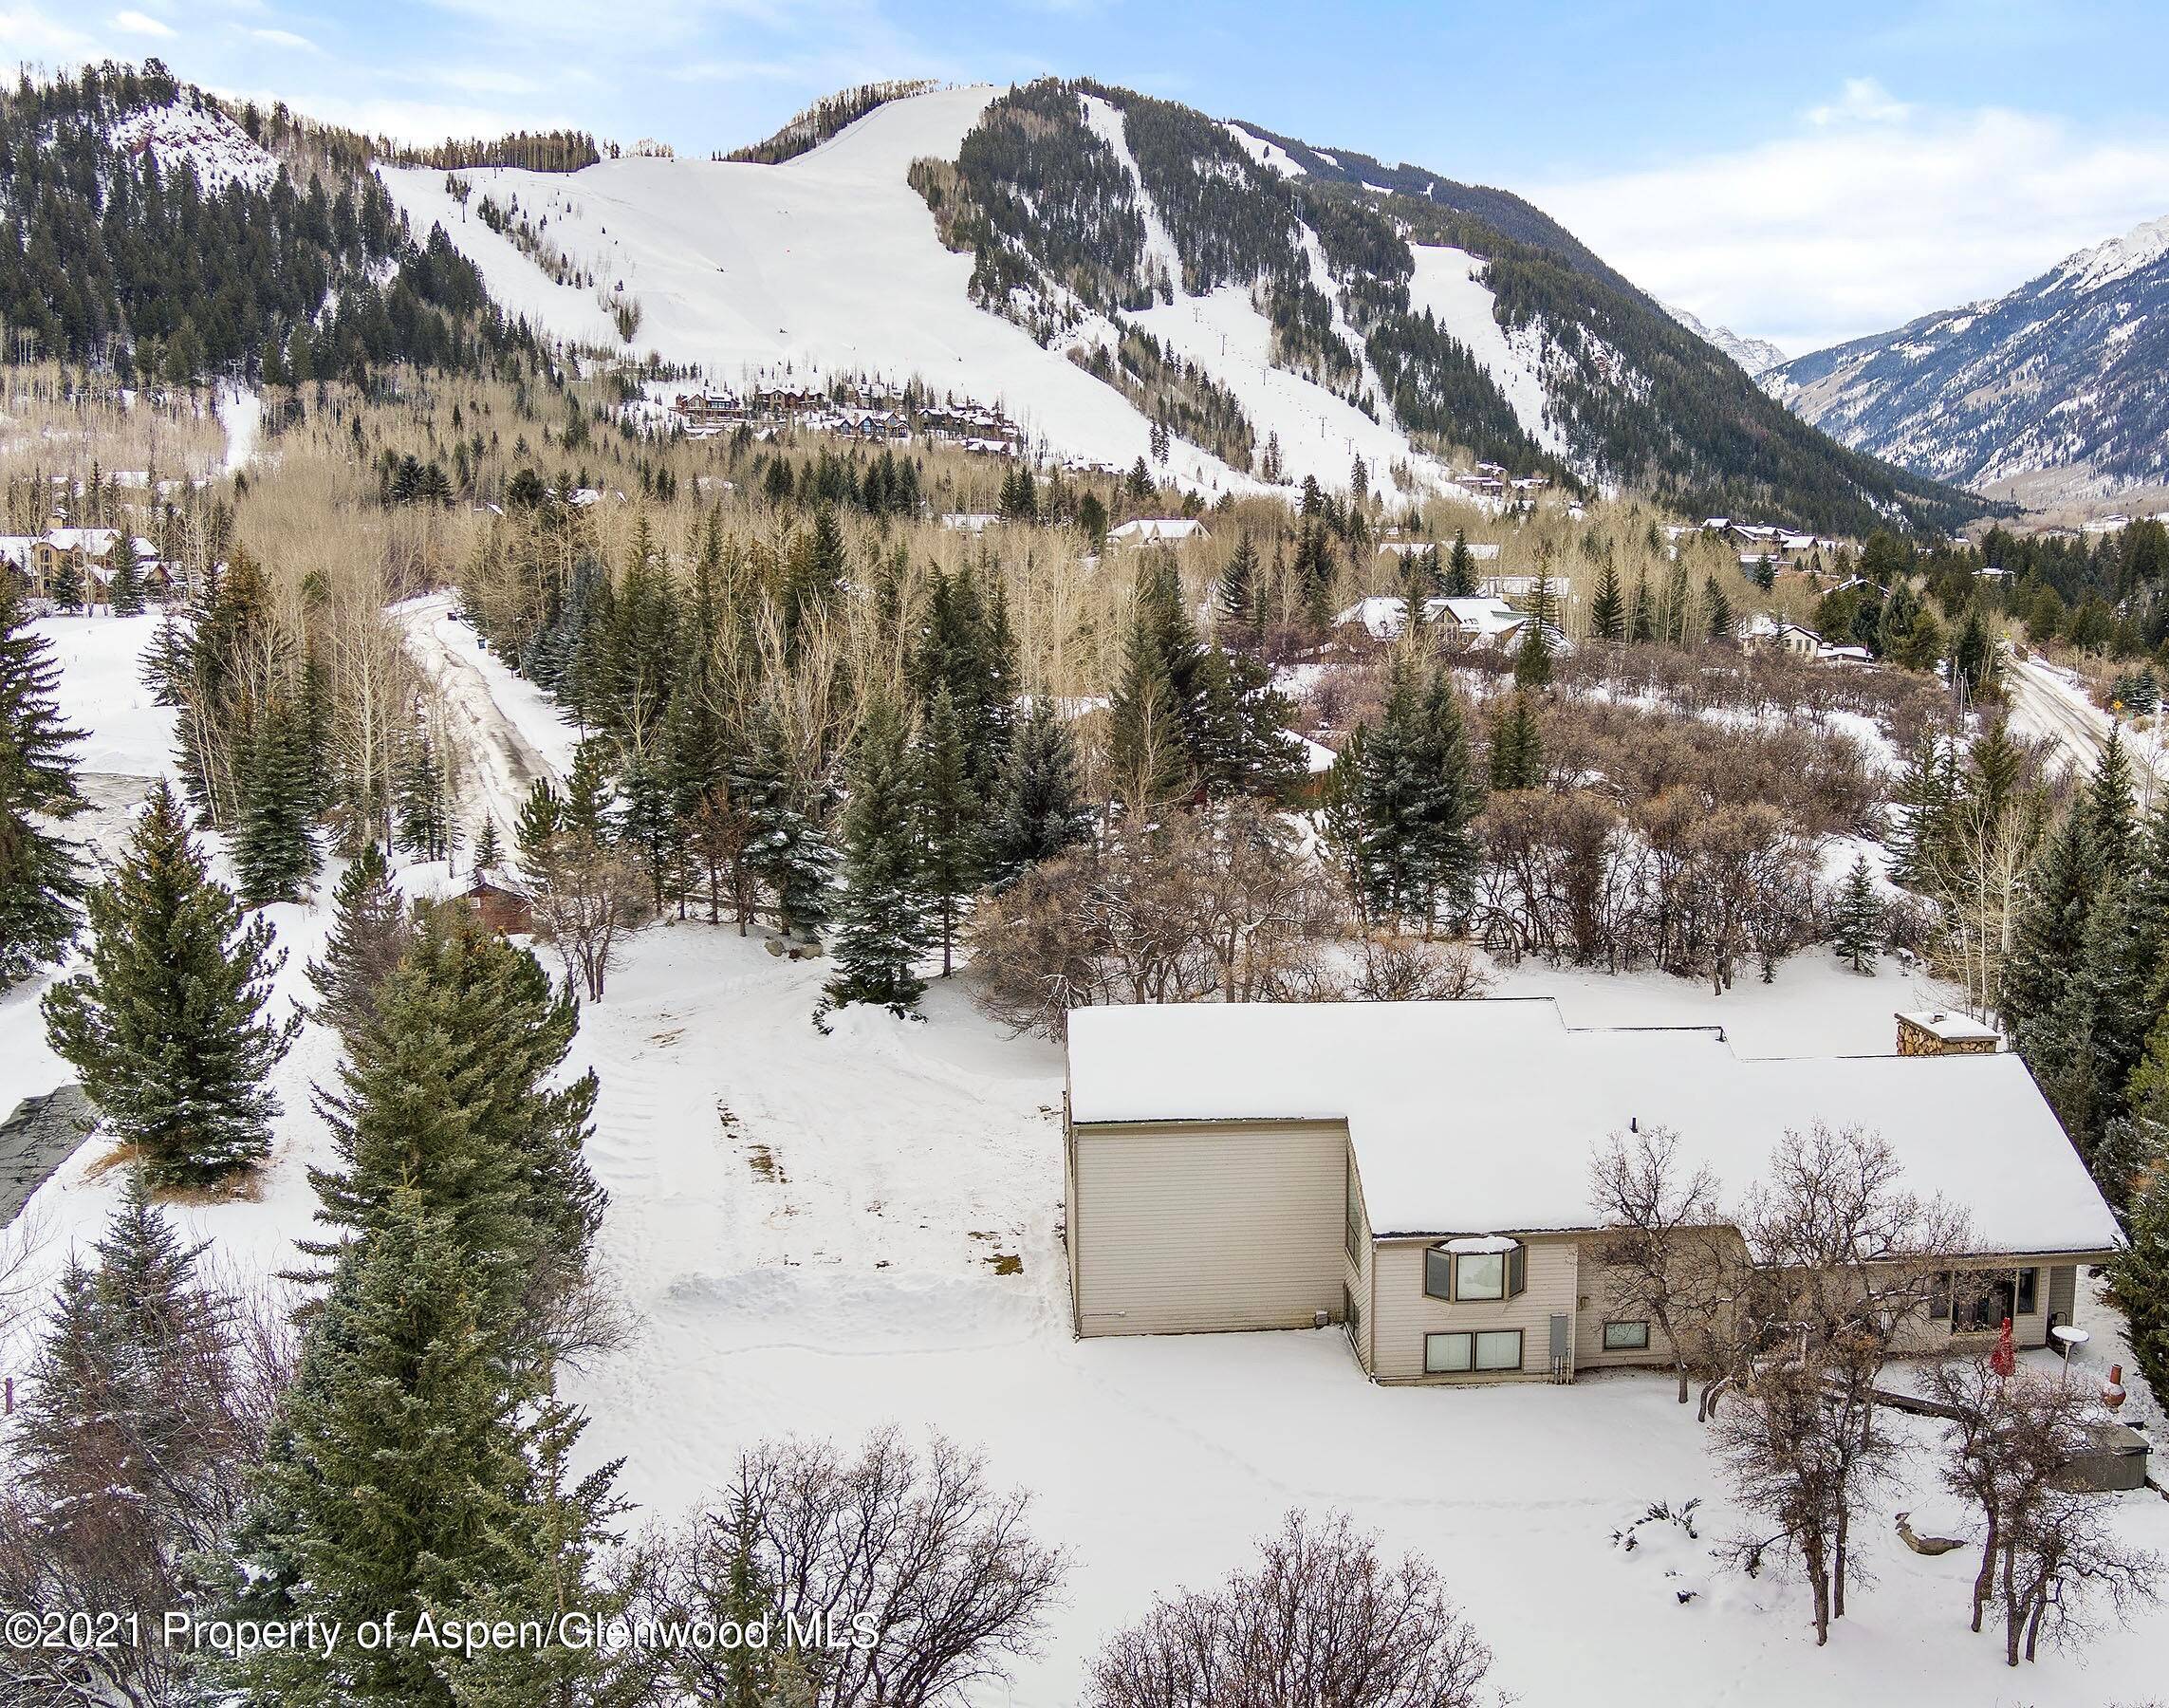 Discover this 1. 1 acre flat lot with dramatic views of Buttermilk, Highlands, and the Maroon Creek Valley.